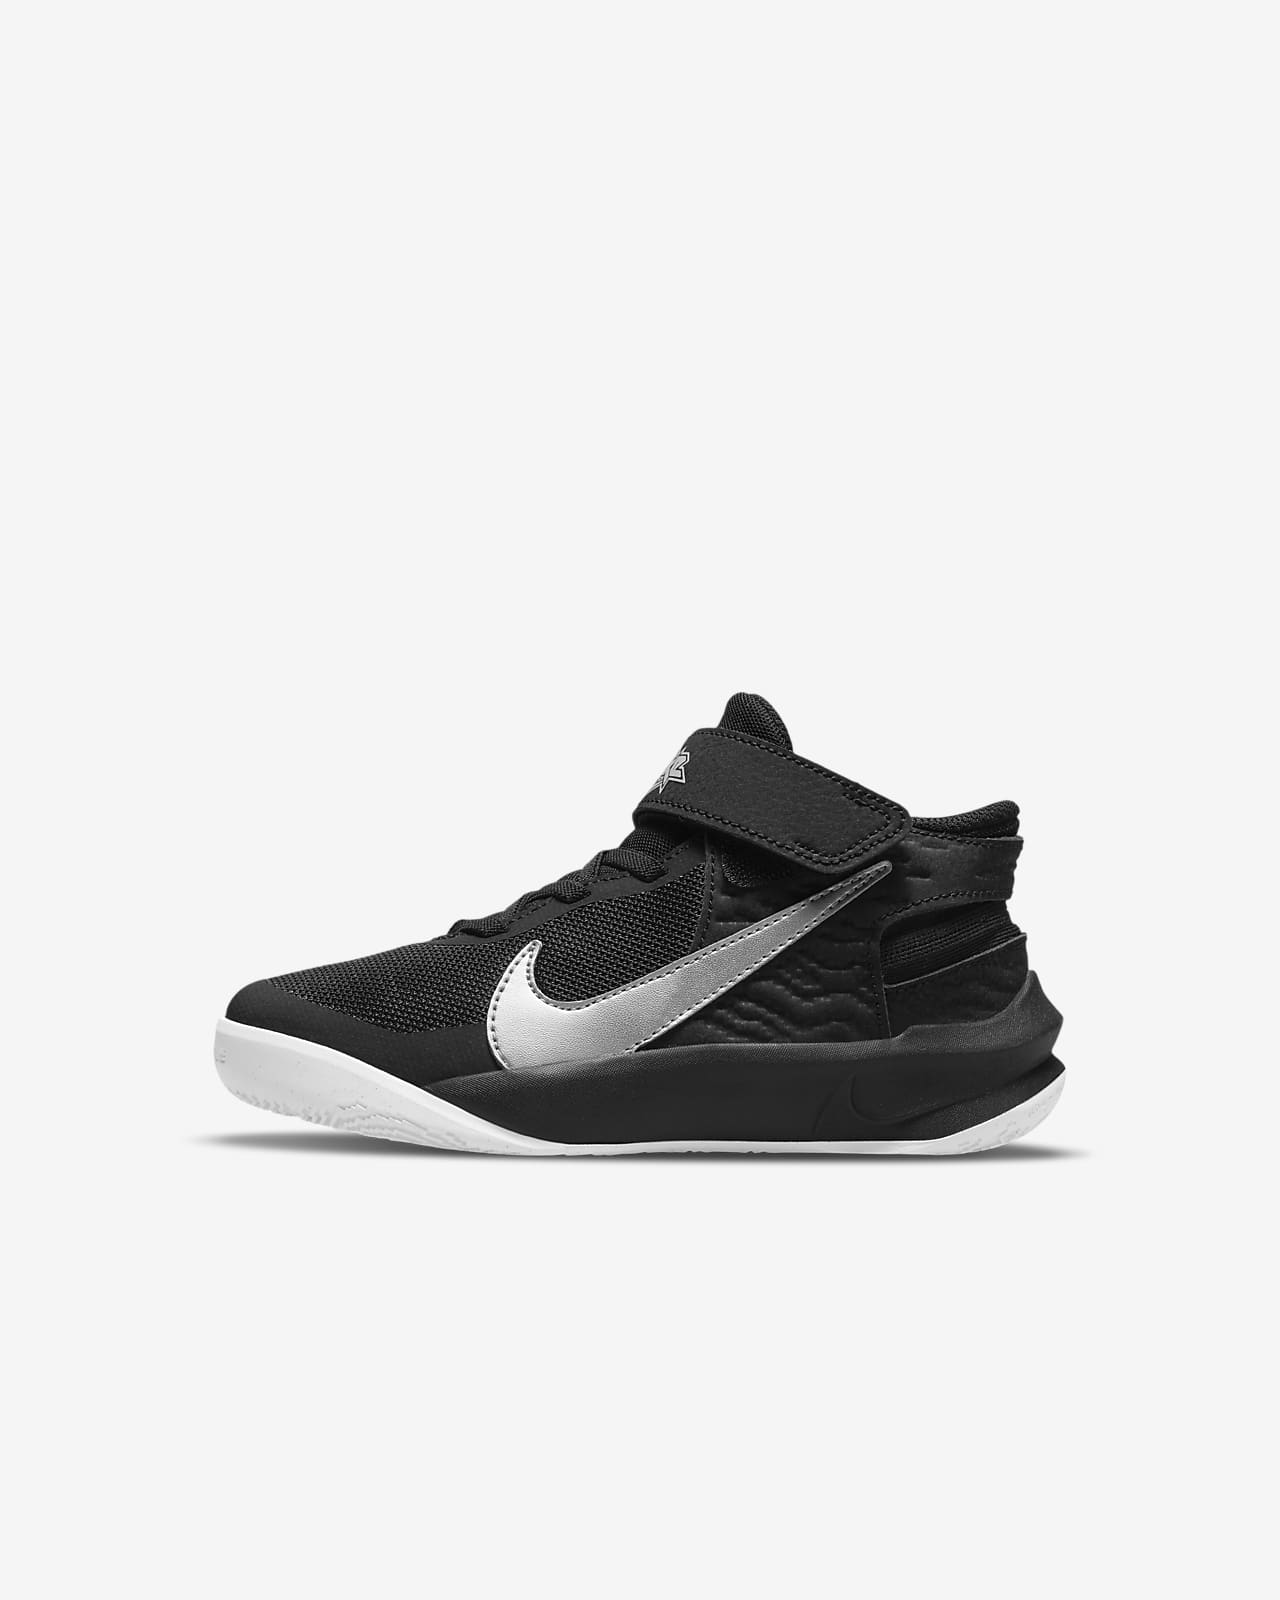 Por Maestro descuento Nike Team Hustle D 10 FlyEase Younger Kids' Easy On/Off Shoes. Nike ID